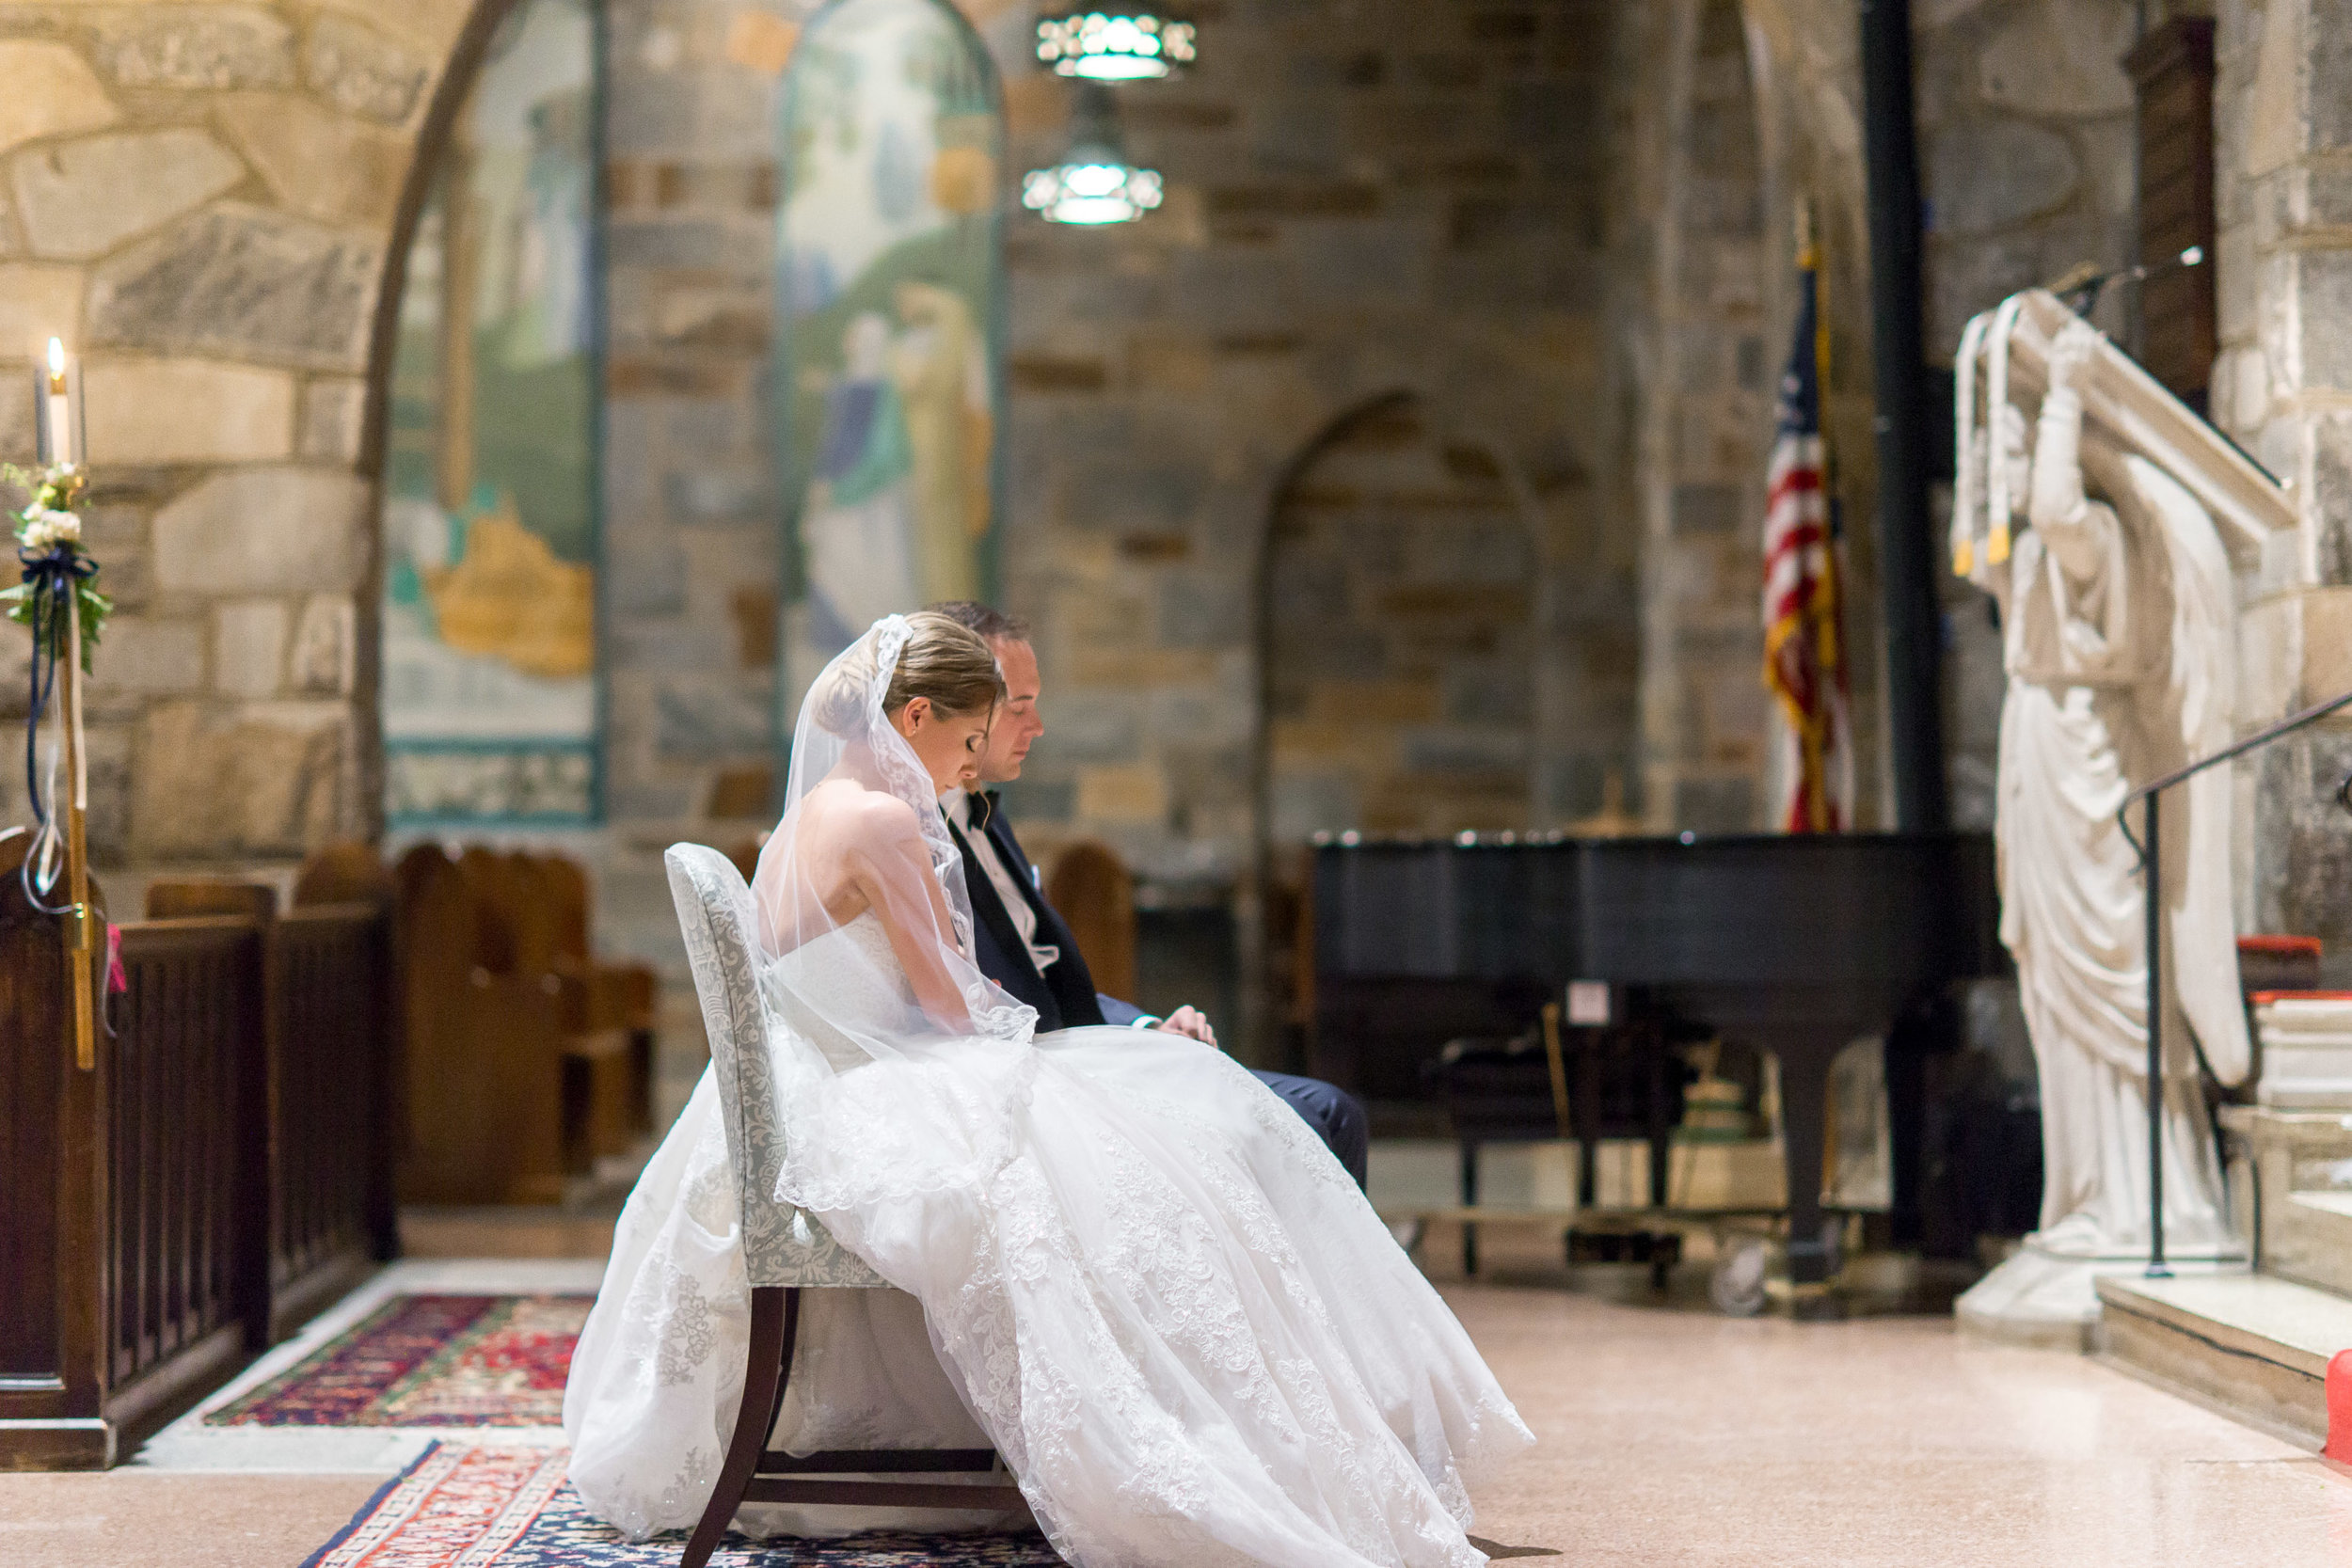 Bride and groom portraits at all saints church wedding in bethesda maryland